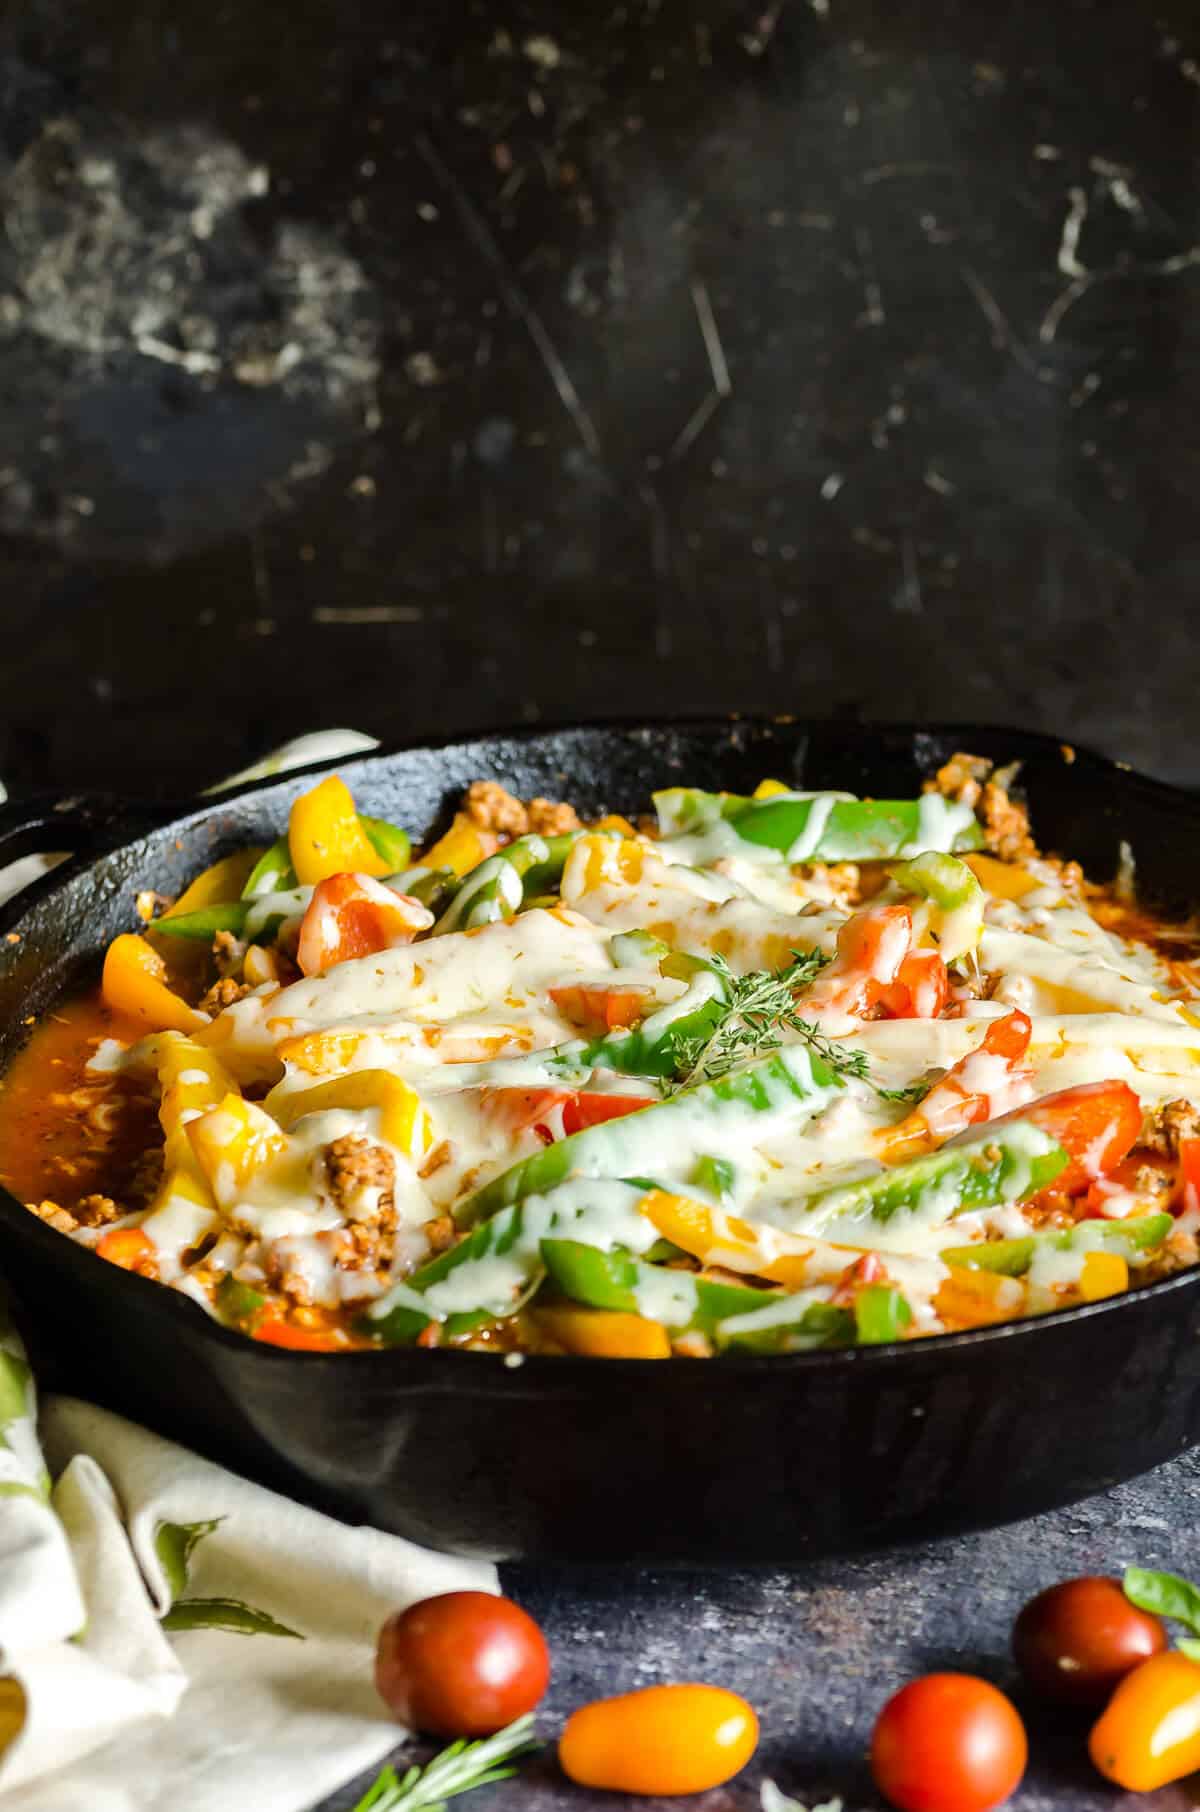 cast iron skillet with ground turkey, cauli rice, colored bell peppers and melted cheese